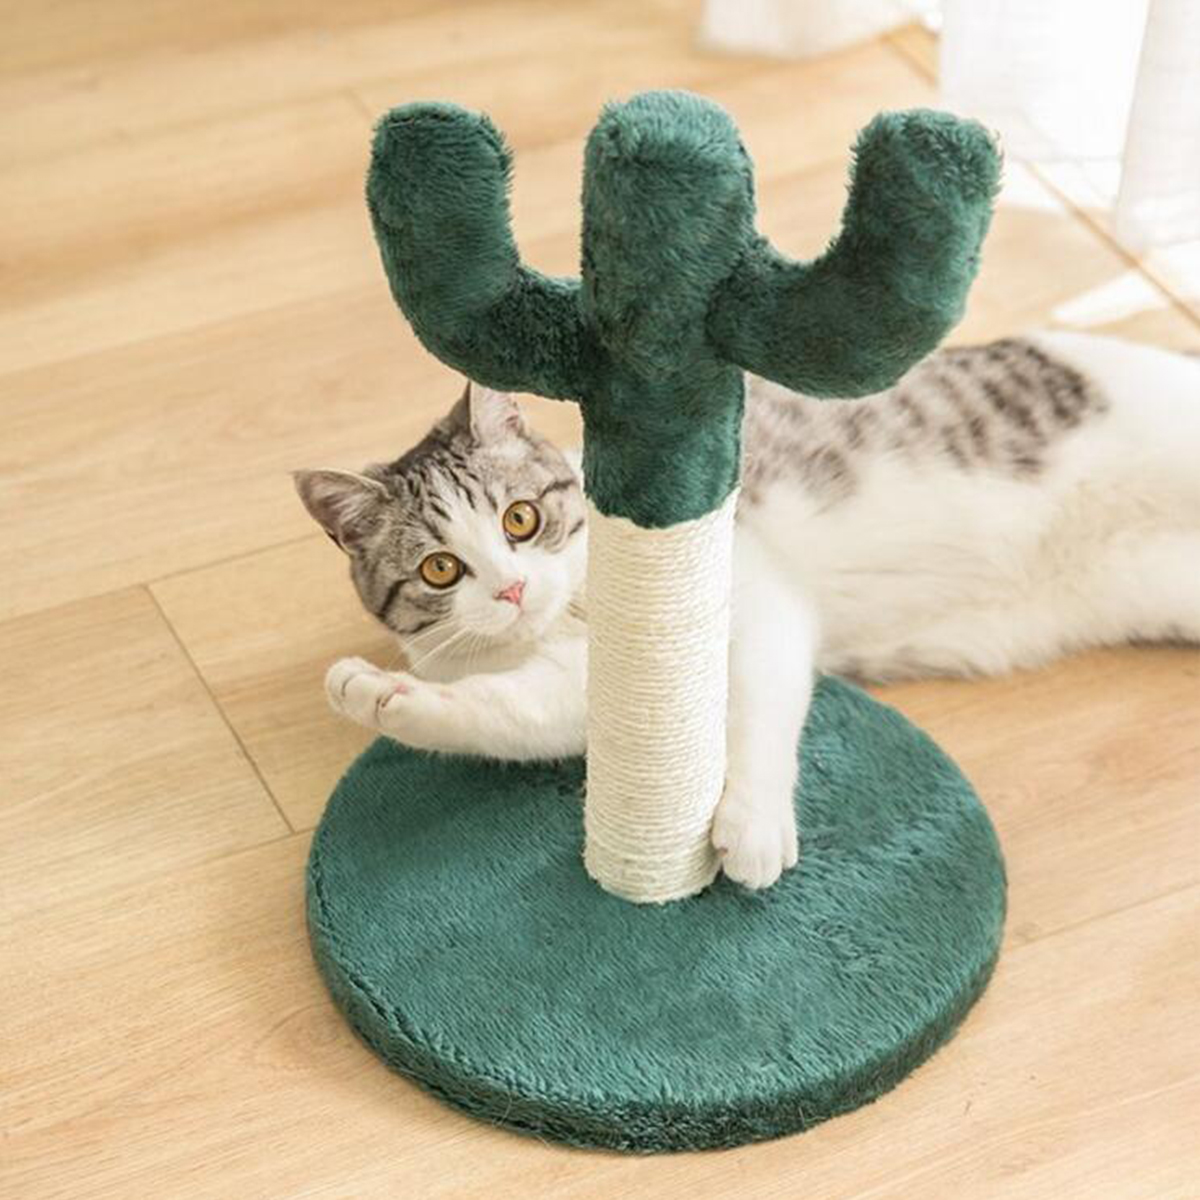 Cute-Cactus-Pet-Cat-Tree-Toys-with-Ball-Scratcher-Posts-for-Cats-Kitten-Climbing-Tree-Cat-Toy-Protec-1914852-6